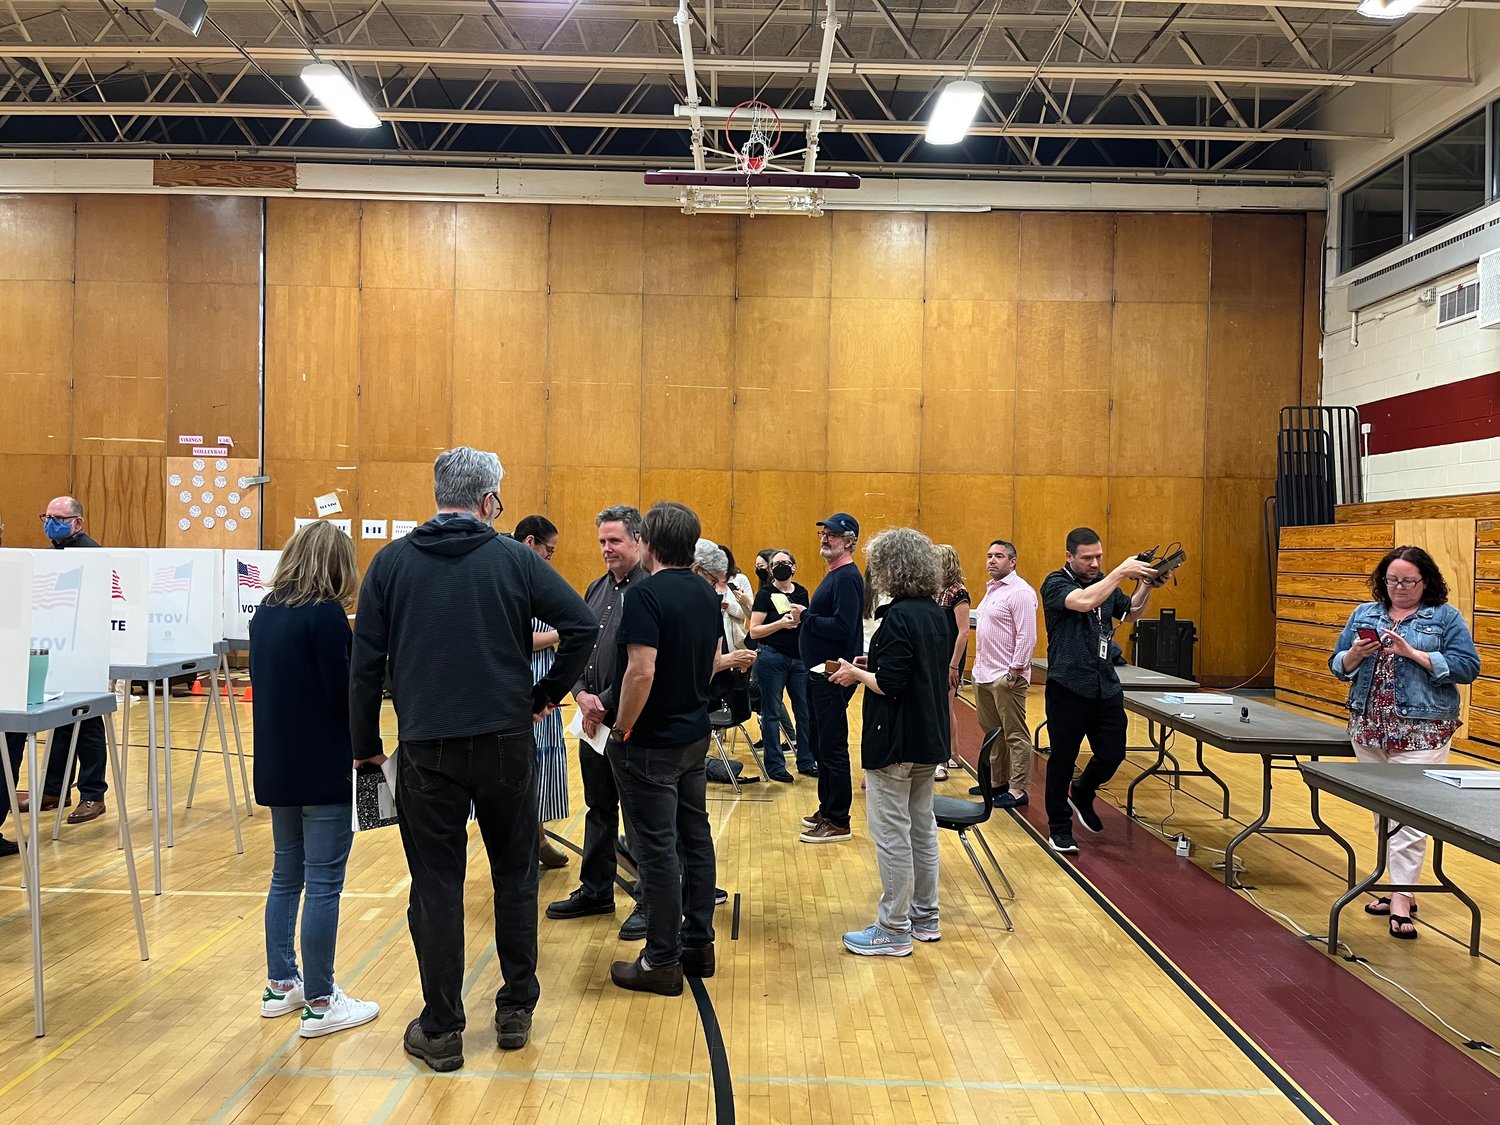 Anxious voters in the North Shore High School gym waited until nearly midnight to hear the election results for board candidates and the budget.